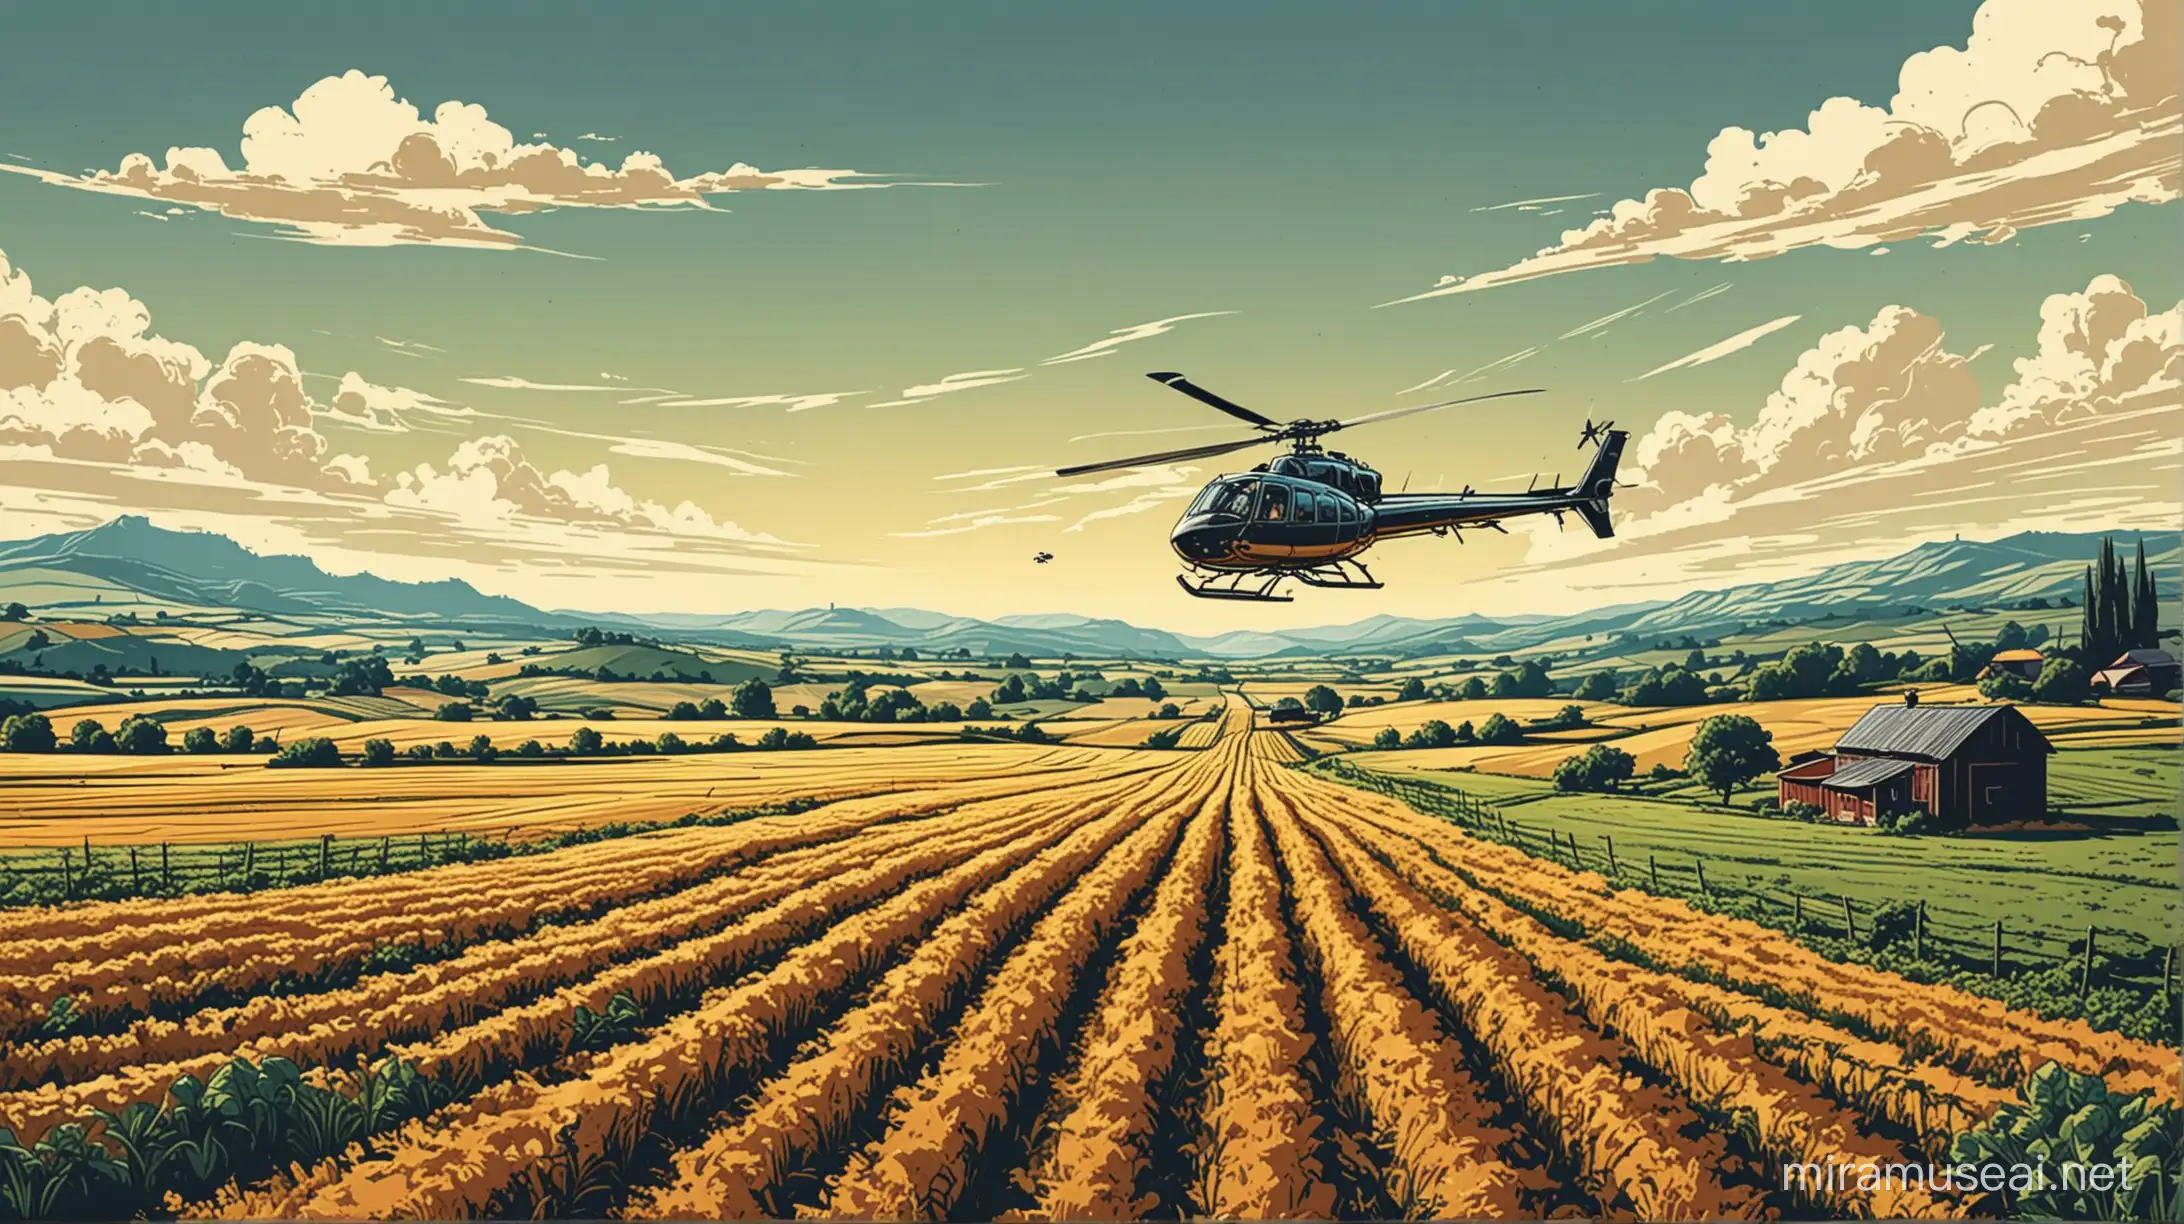 Farmland fields with helicopter far in the distance comic book style illustration 